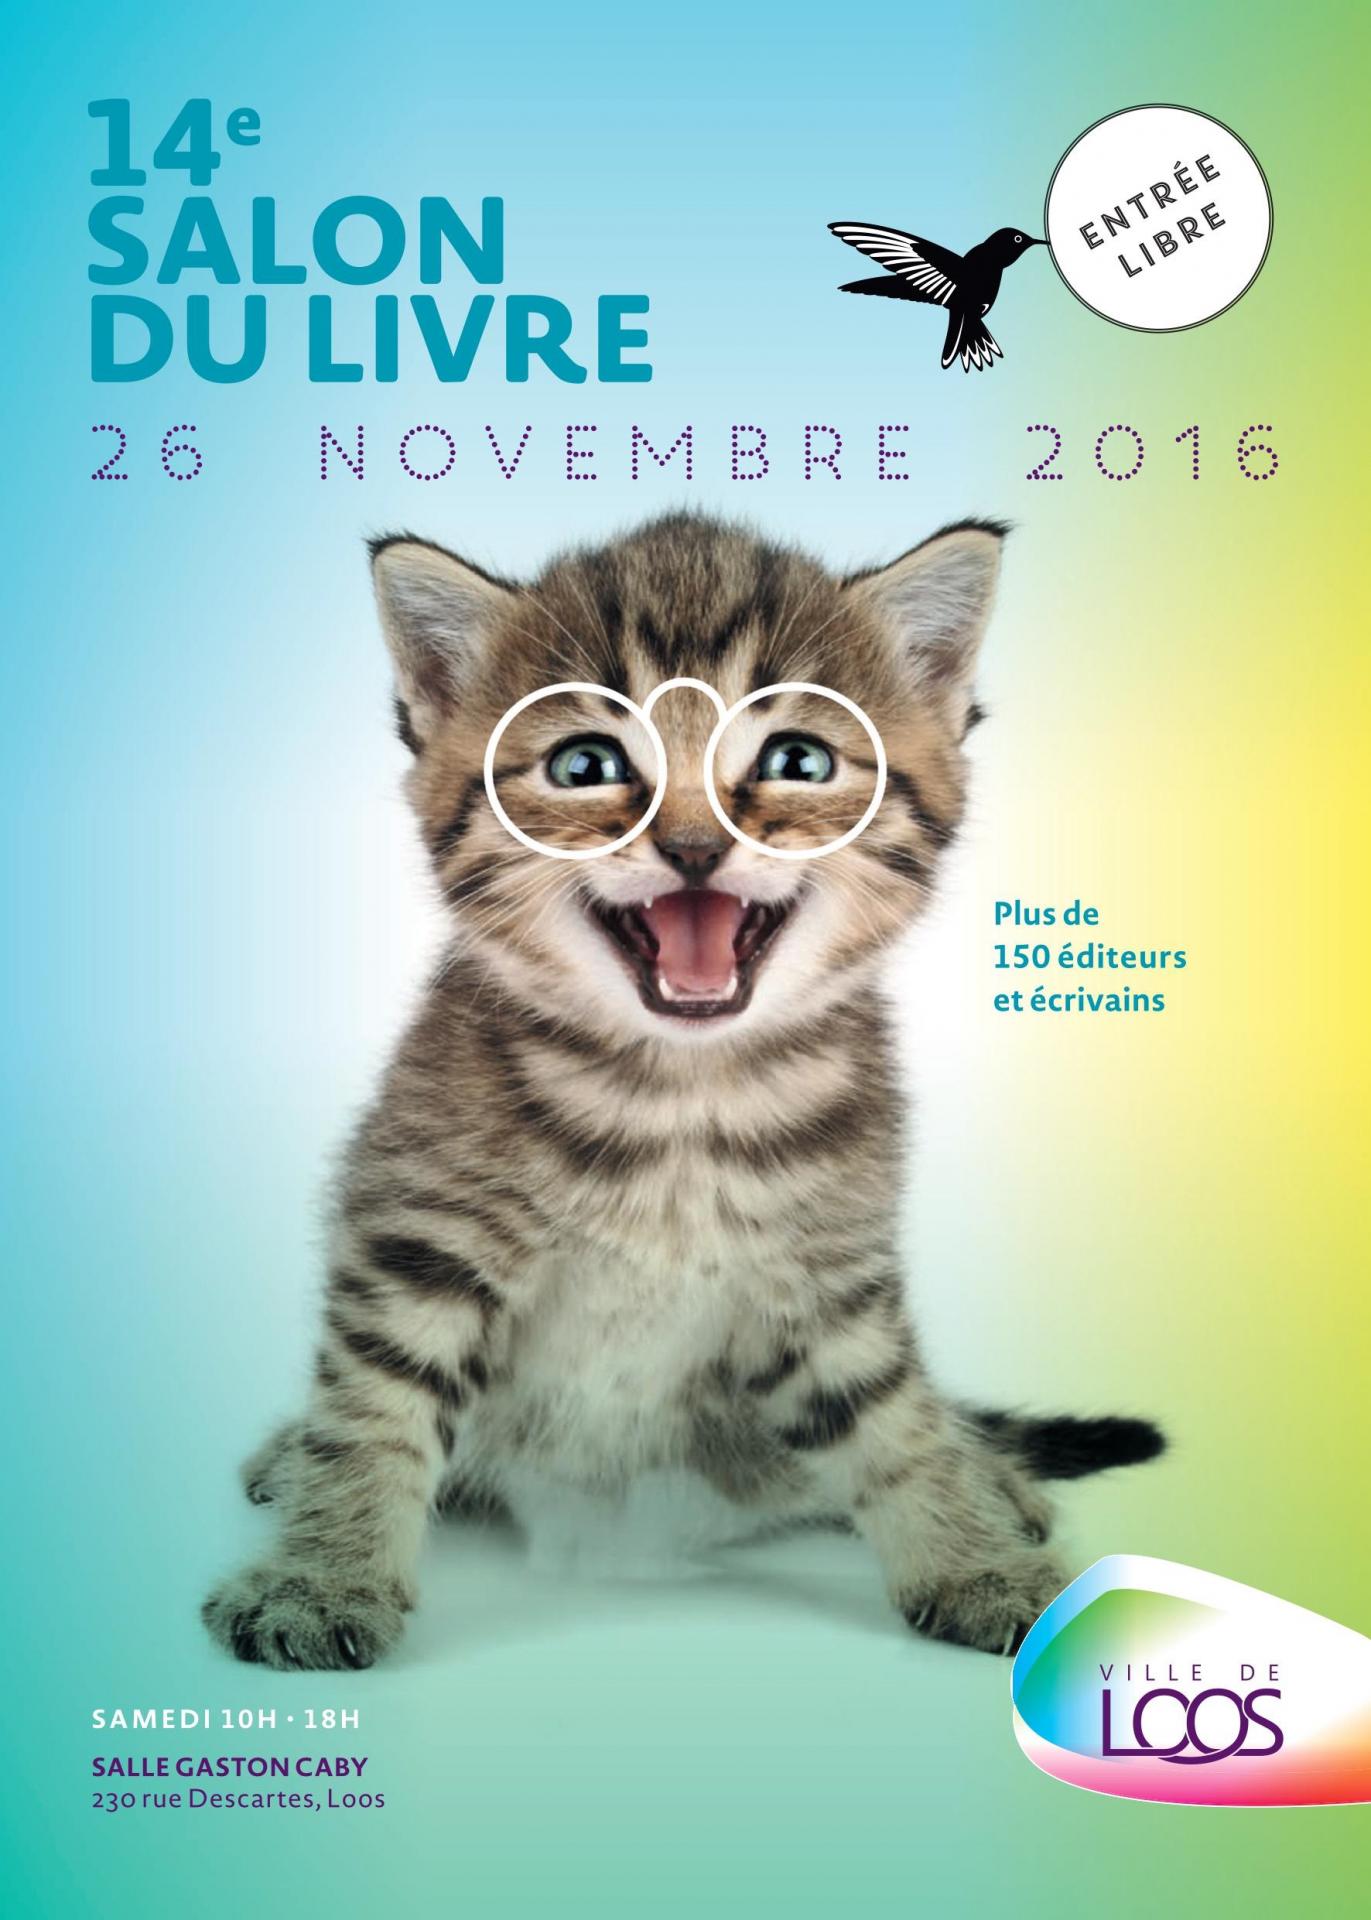 Loos affiche 2016